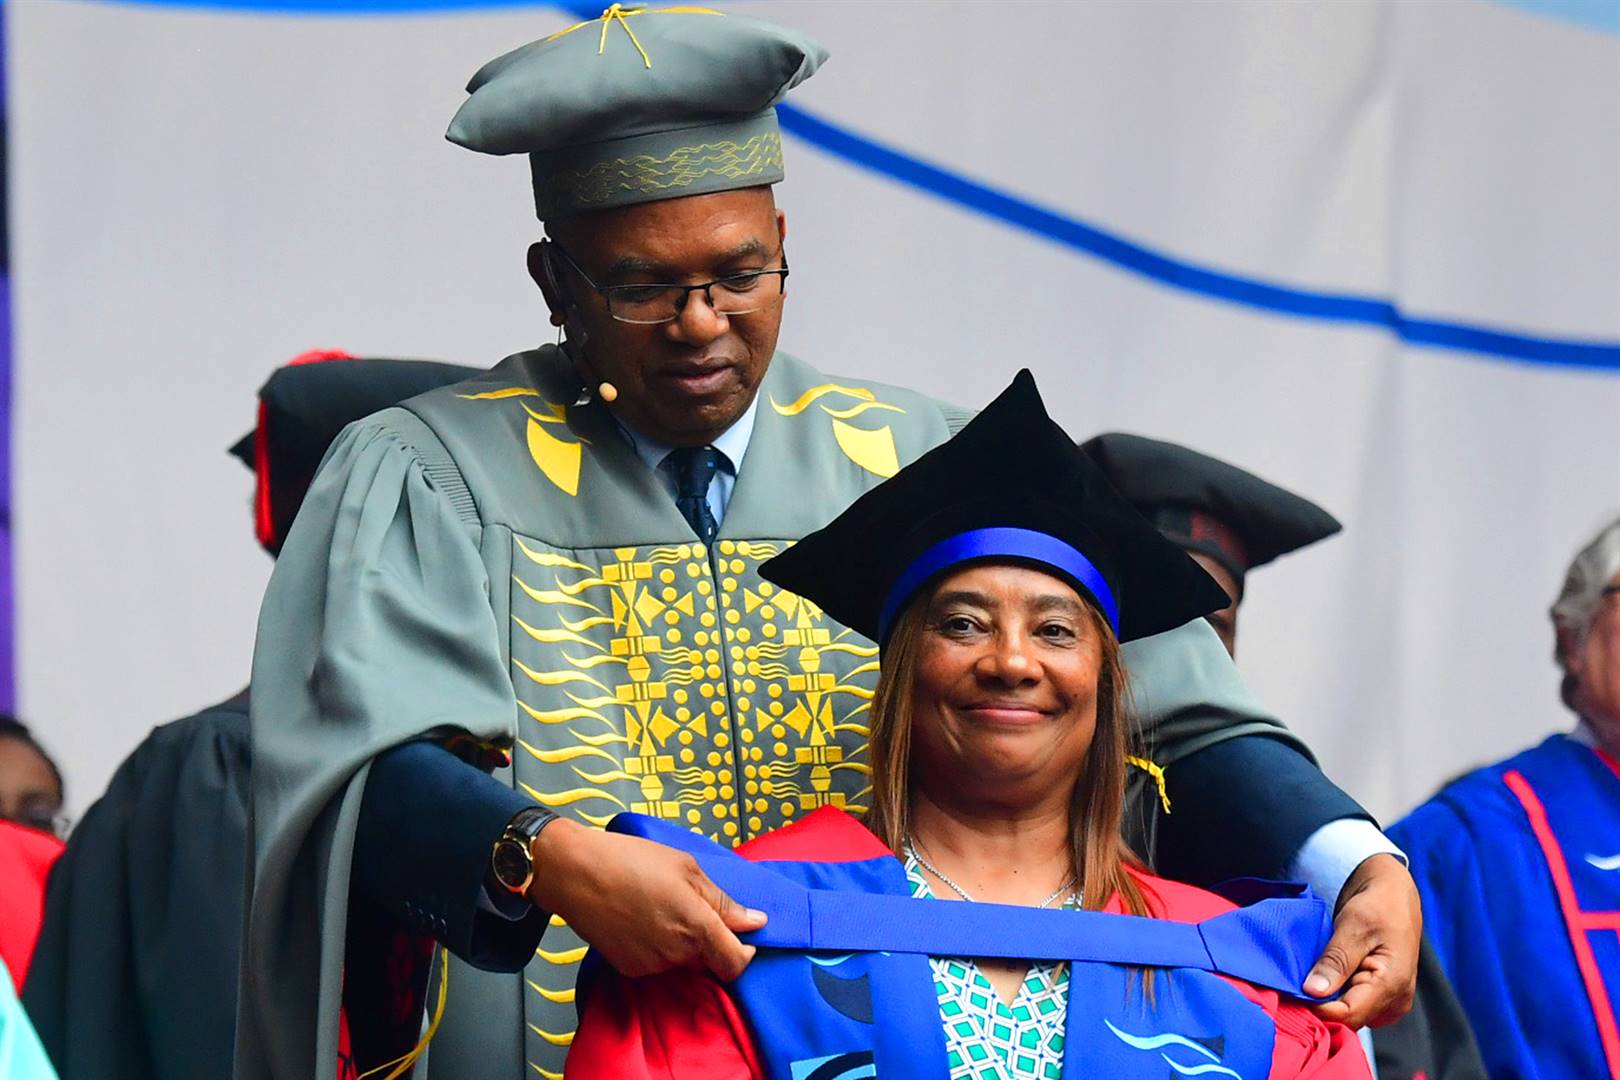 Prof. Chris Nhlapo, vice-chancellor of the CPUT, puts the ribbon of the honorary doctorate around the neck of Banyana Banyana's head coach, Desiree Ellis. (Theo Jephta)